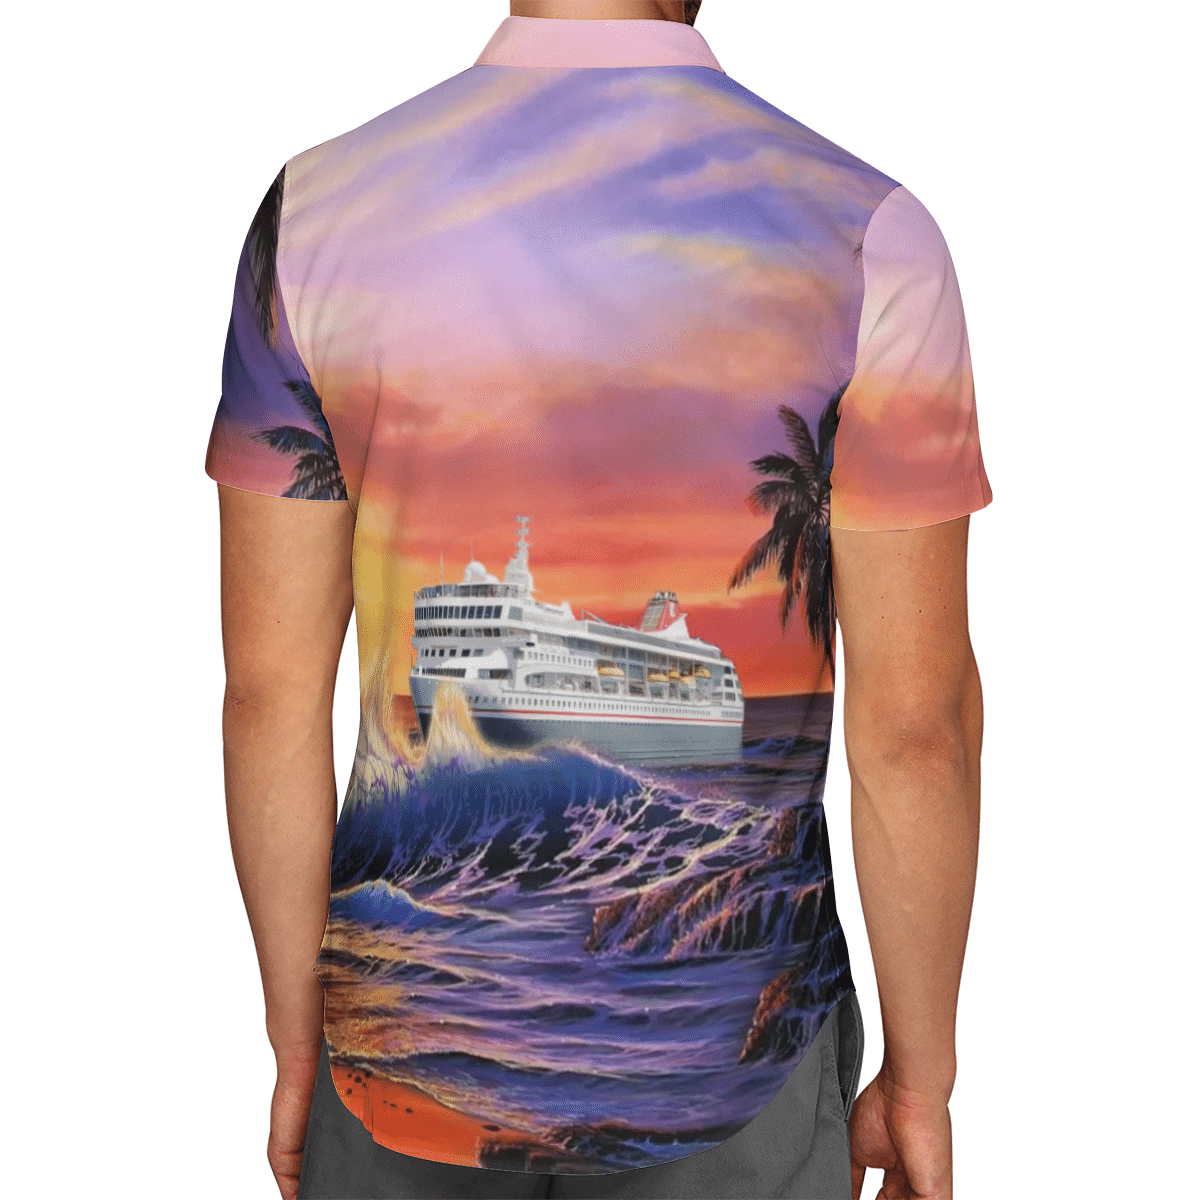 Going to the beach with a quality shirt 99